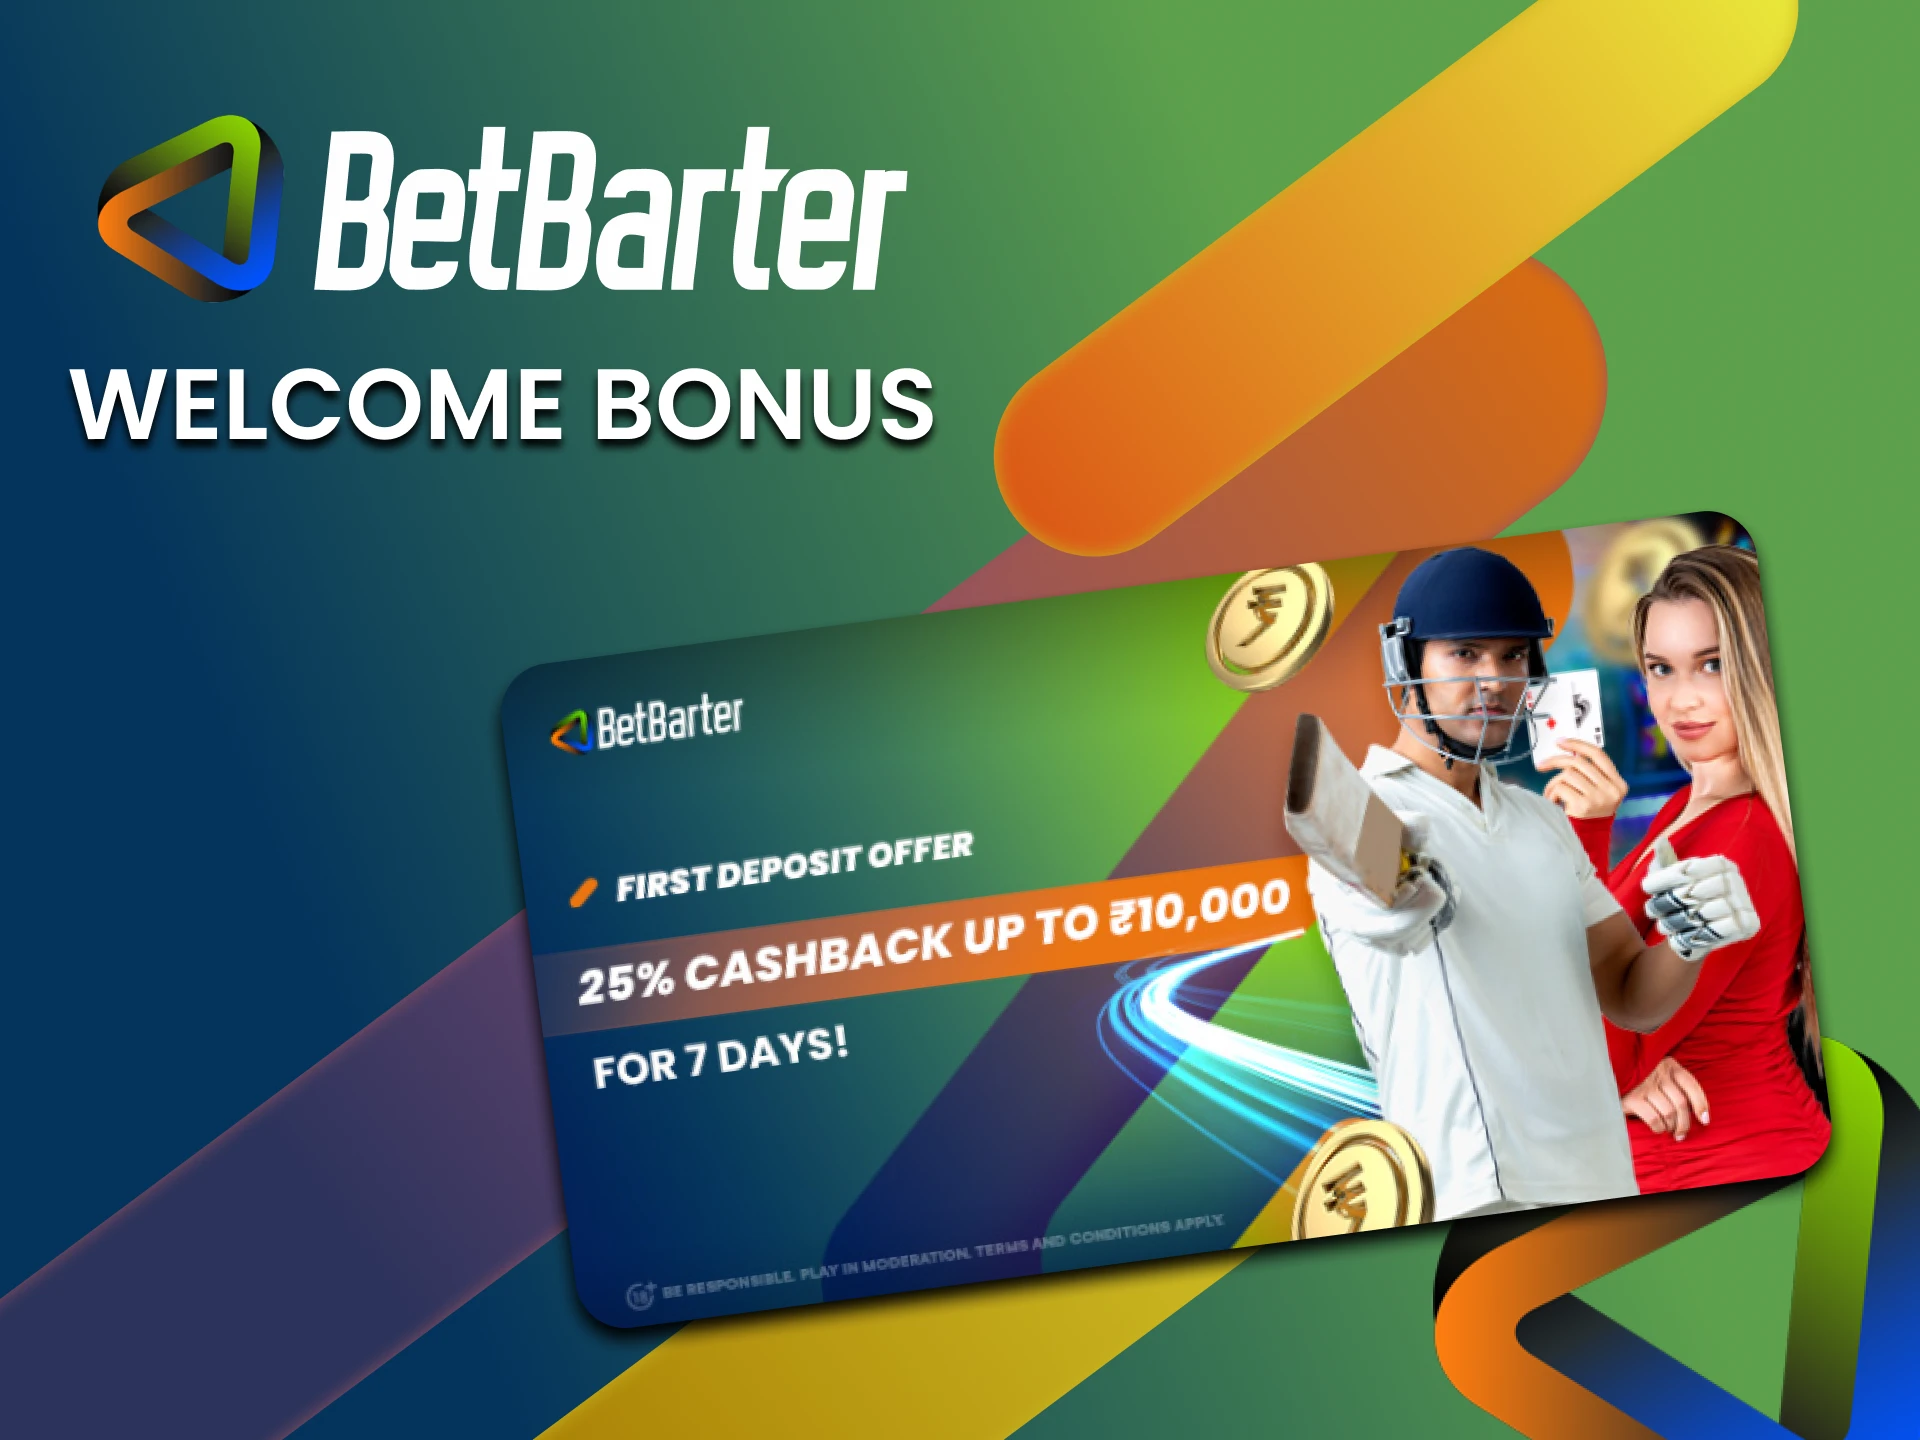 BetBarter is giving away a bonus for betting on cricket.